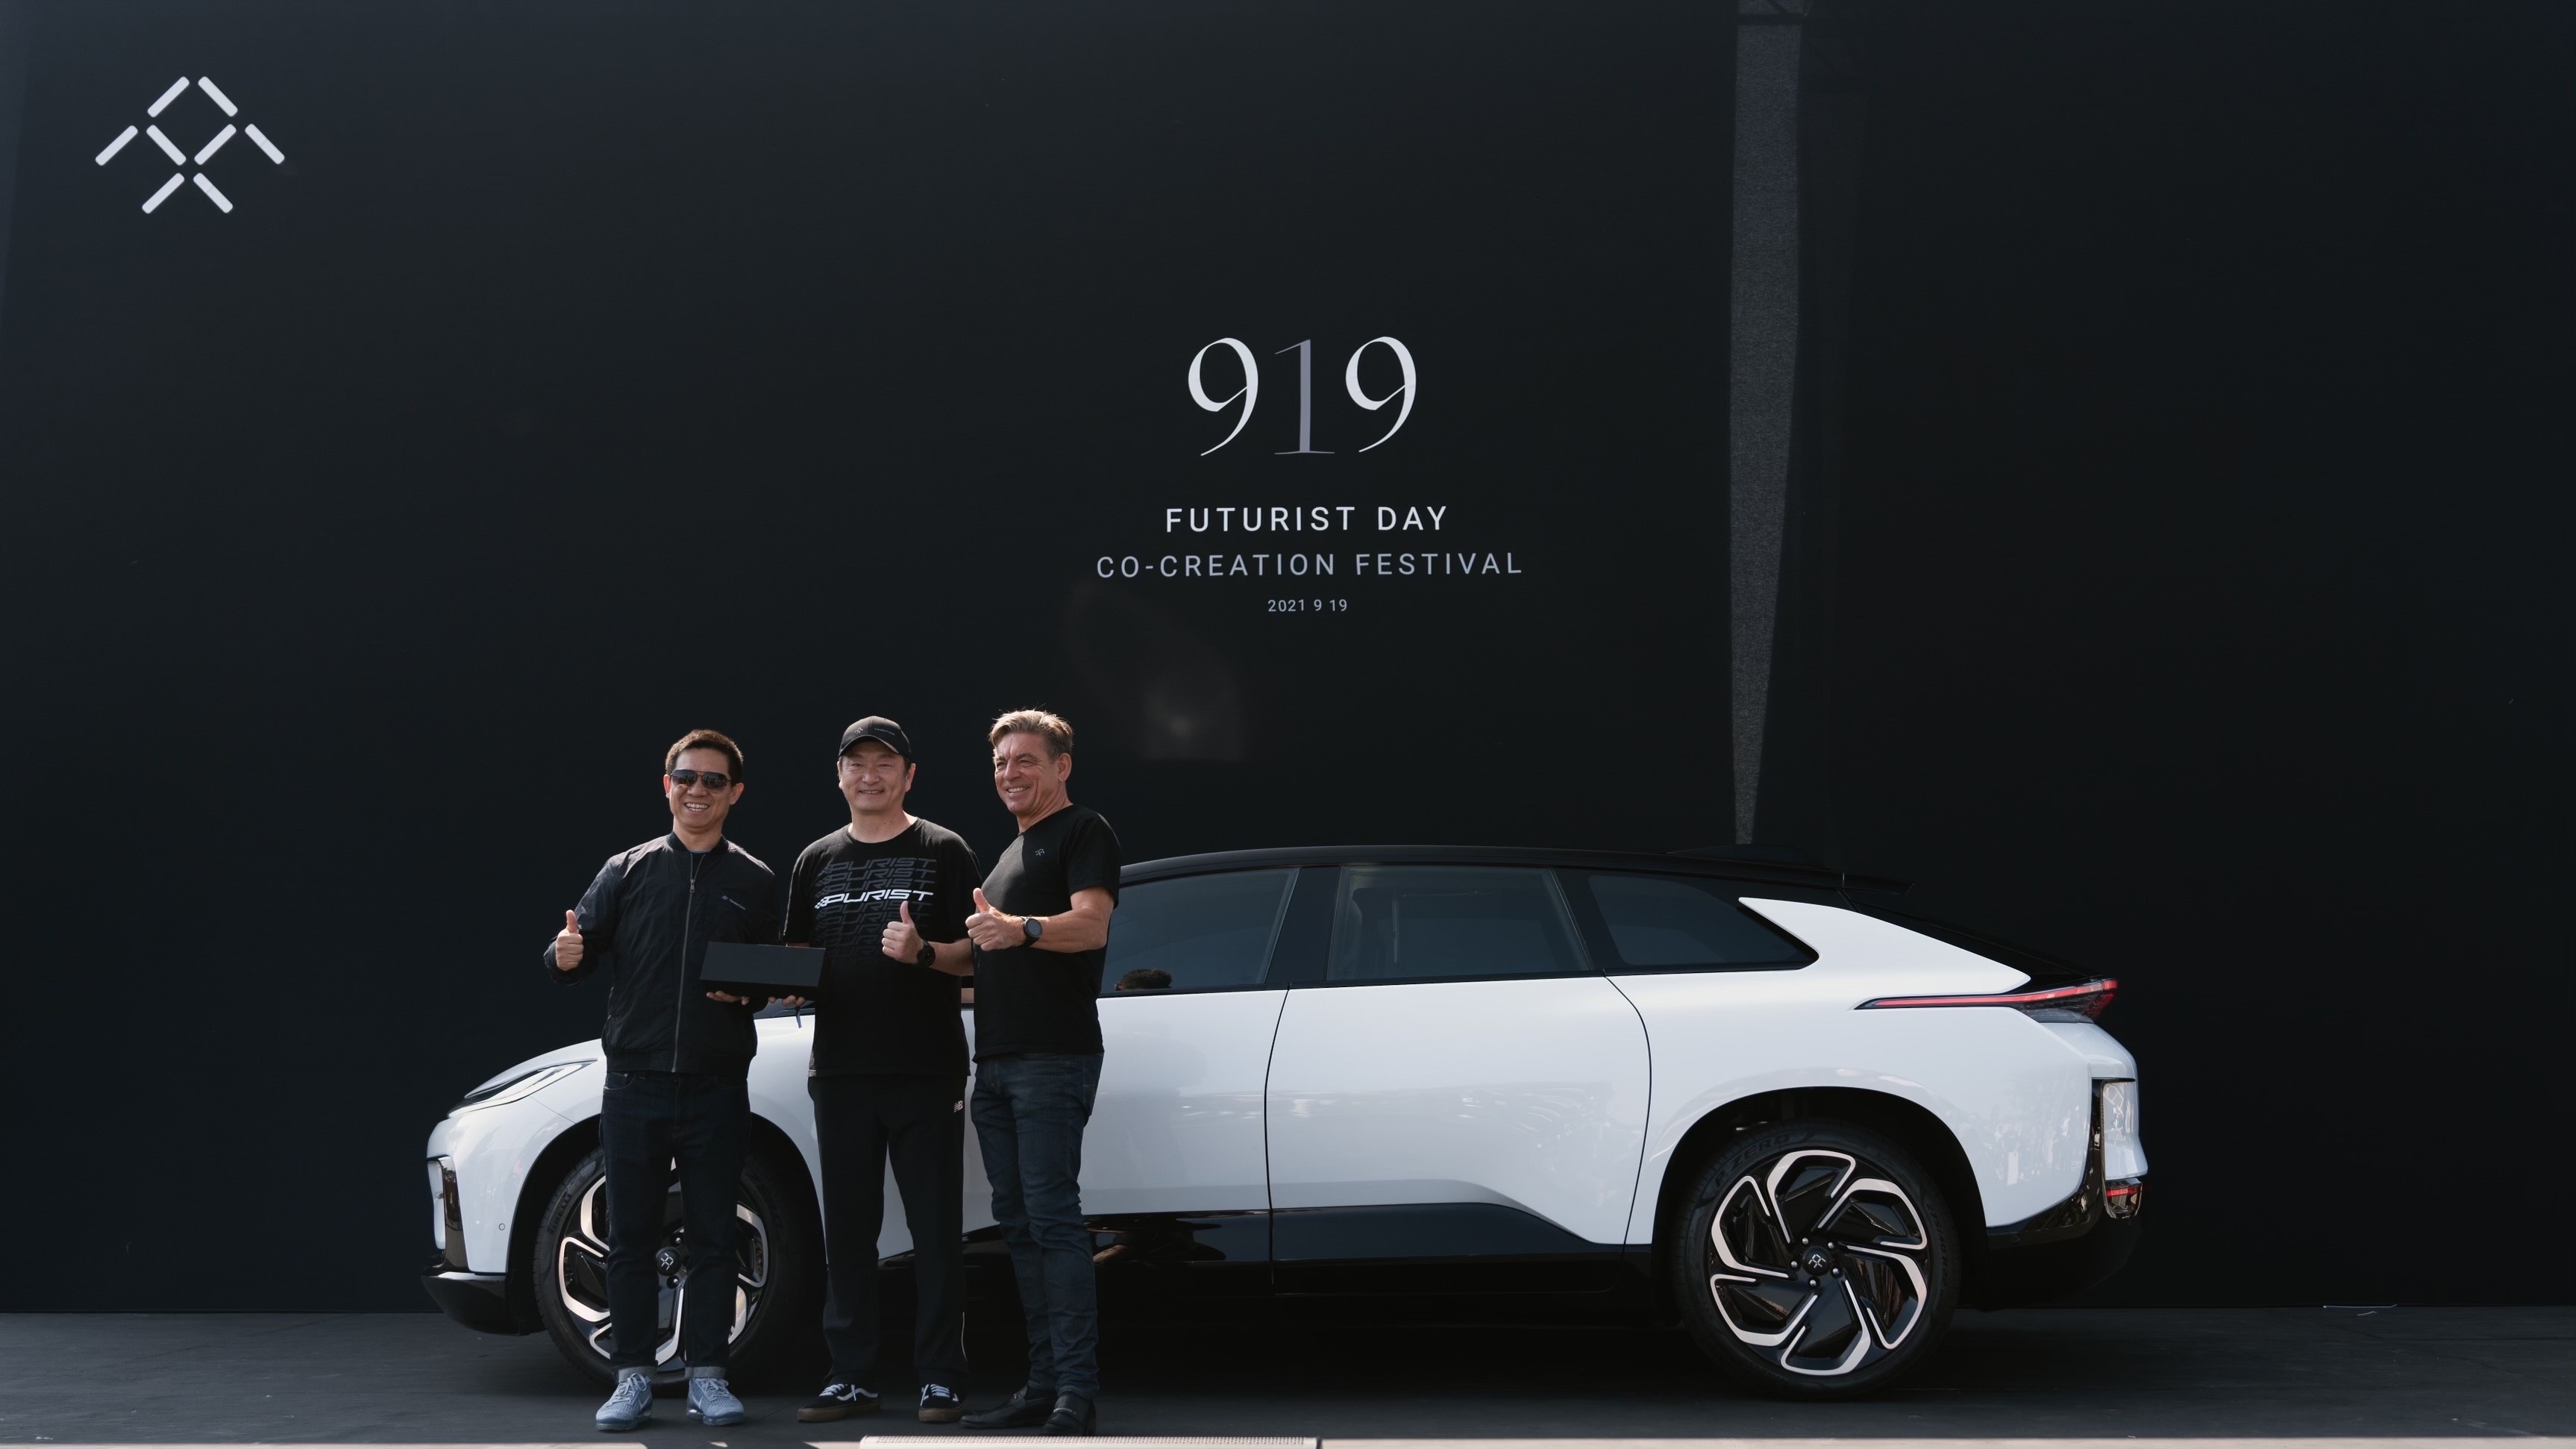 Faraday Future, Partnership with Palantir, Disruptive products and services, Auto futures, 3460x1950 HD Desktop